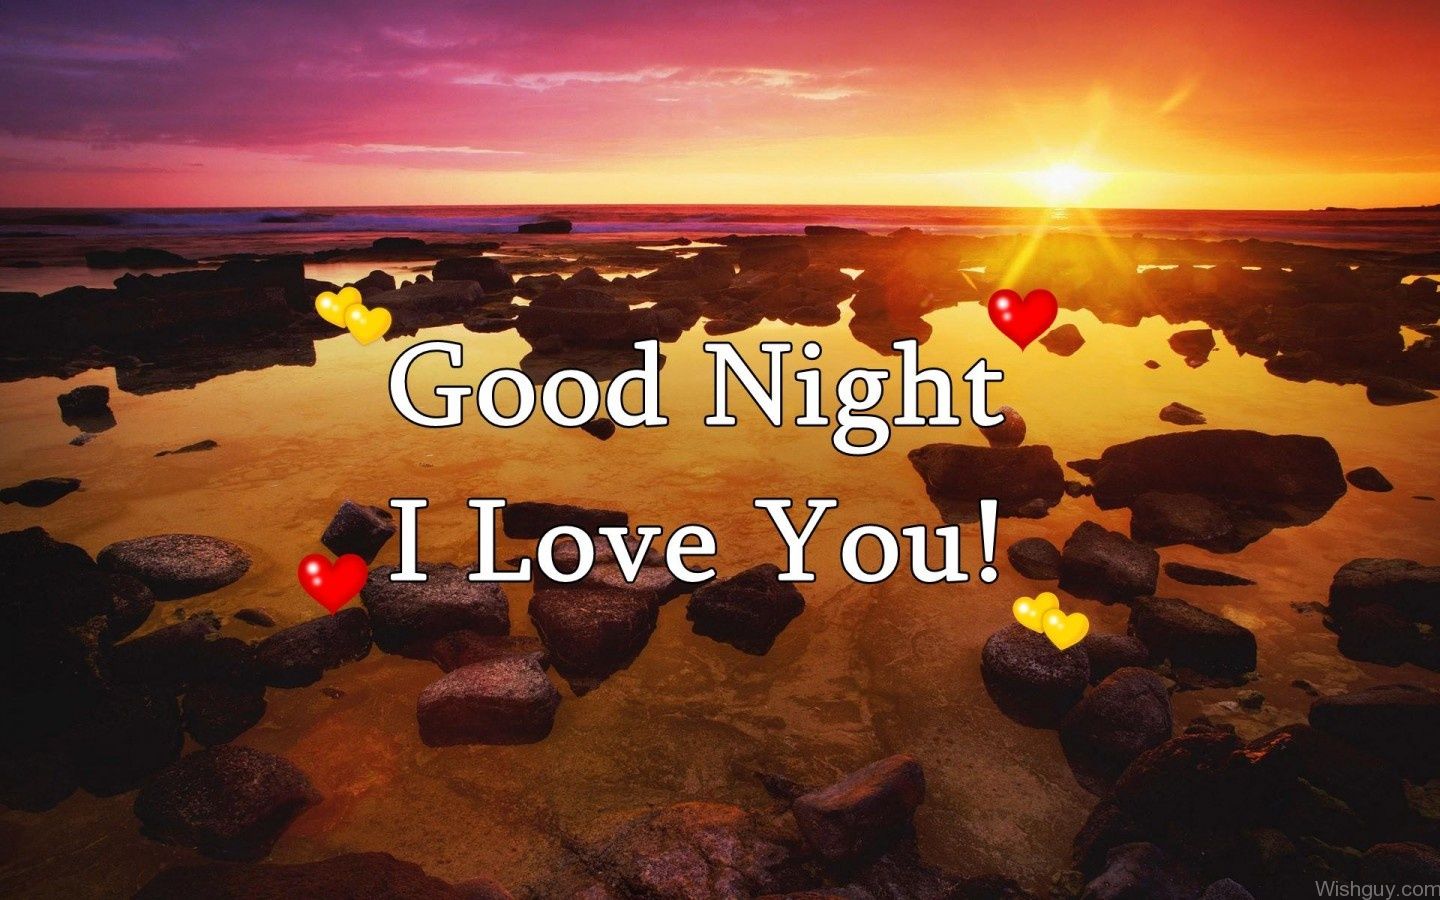 Good Night I Love You Wishes Greetings Pictures Wish Guy